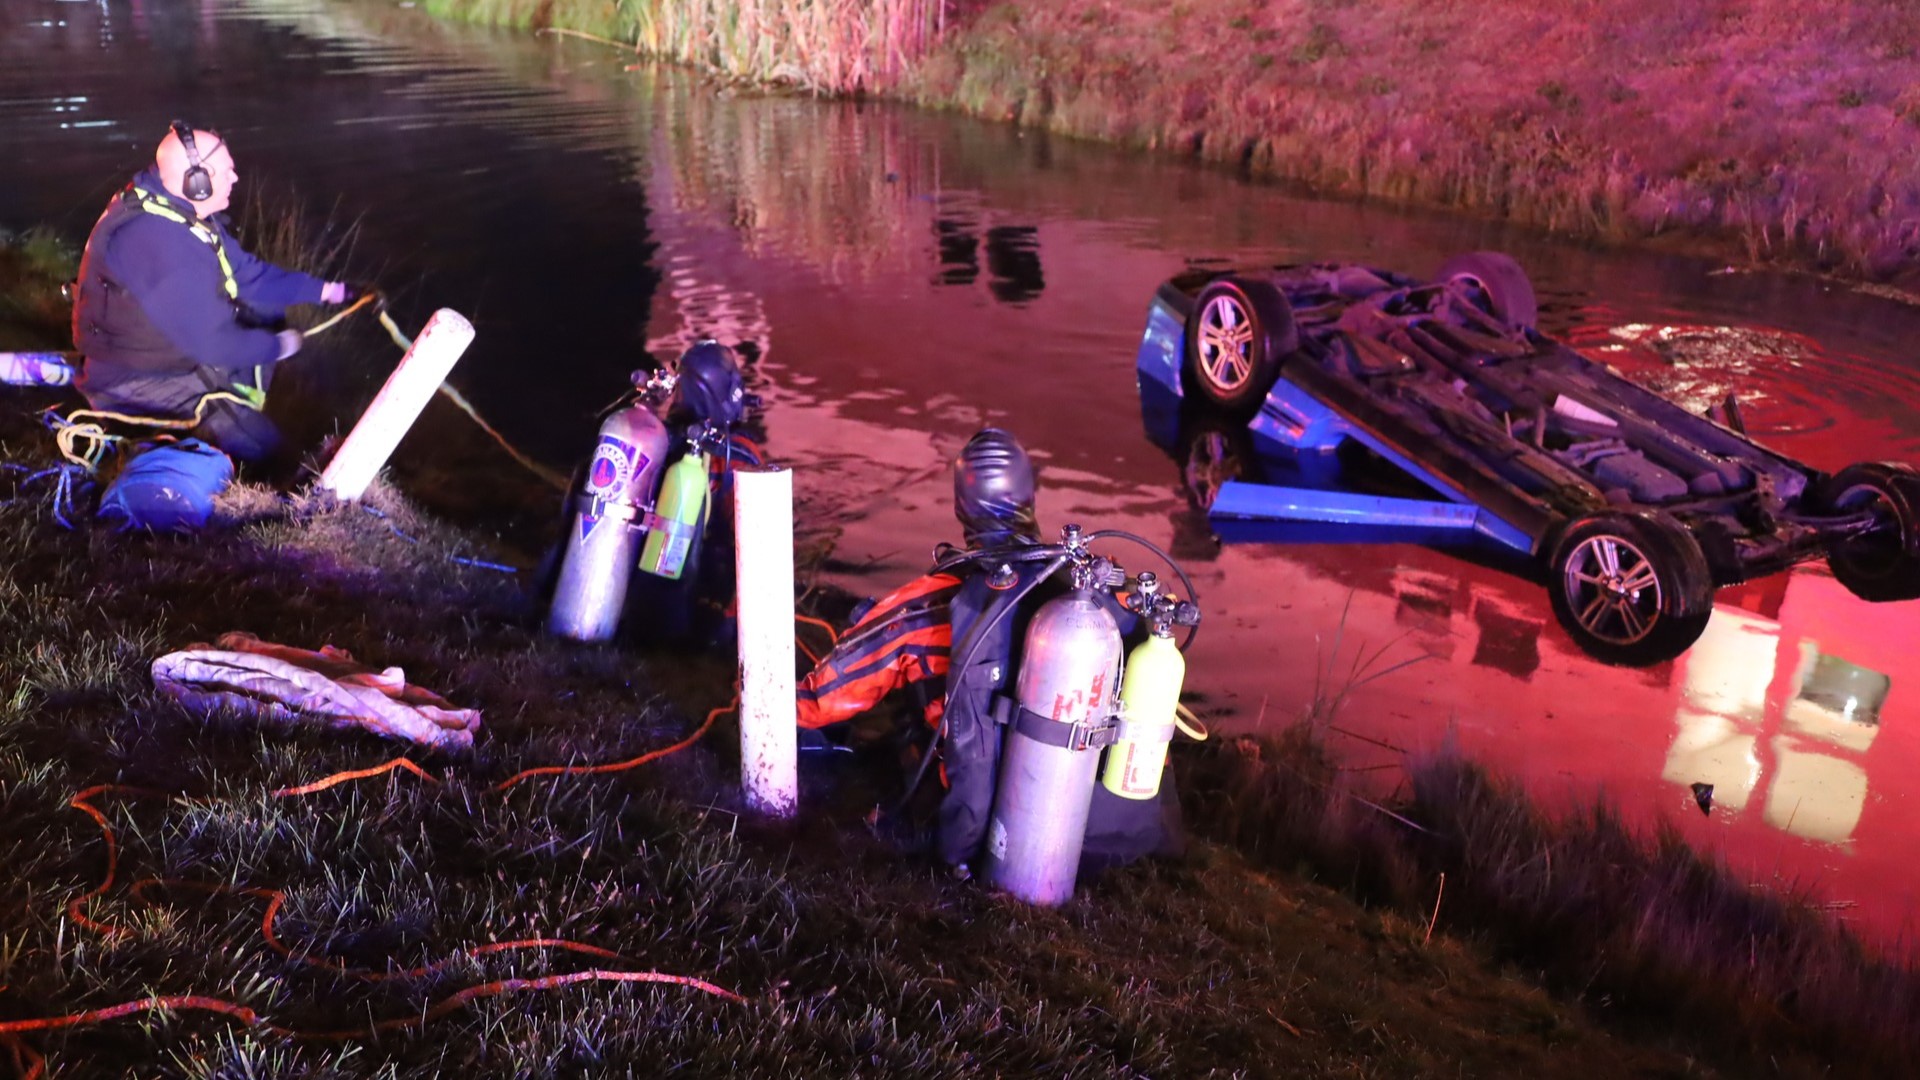 The Indianapolis Fire Department said firefighters made an "aggressive rescue" of the driver.